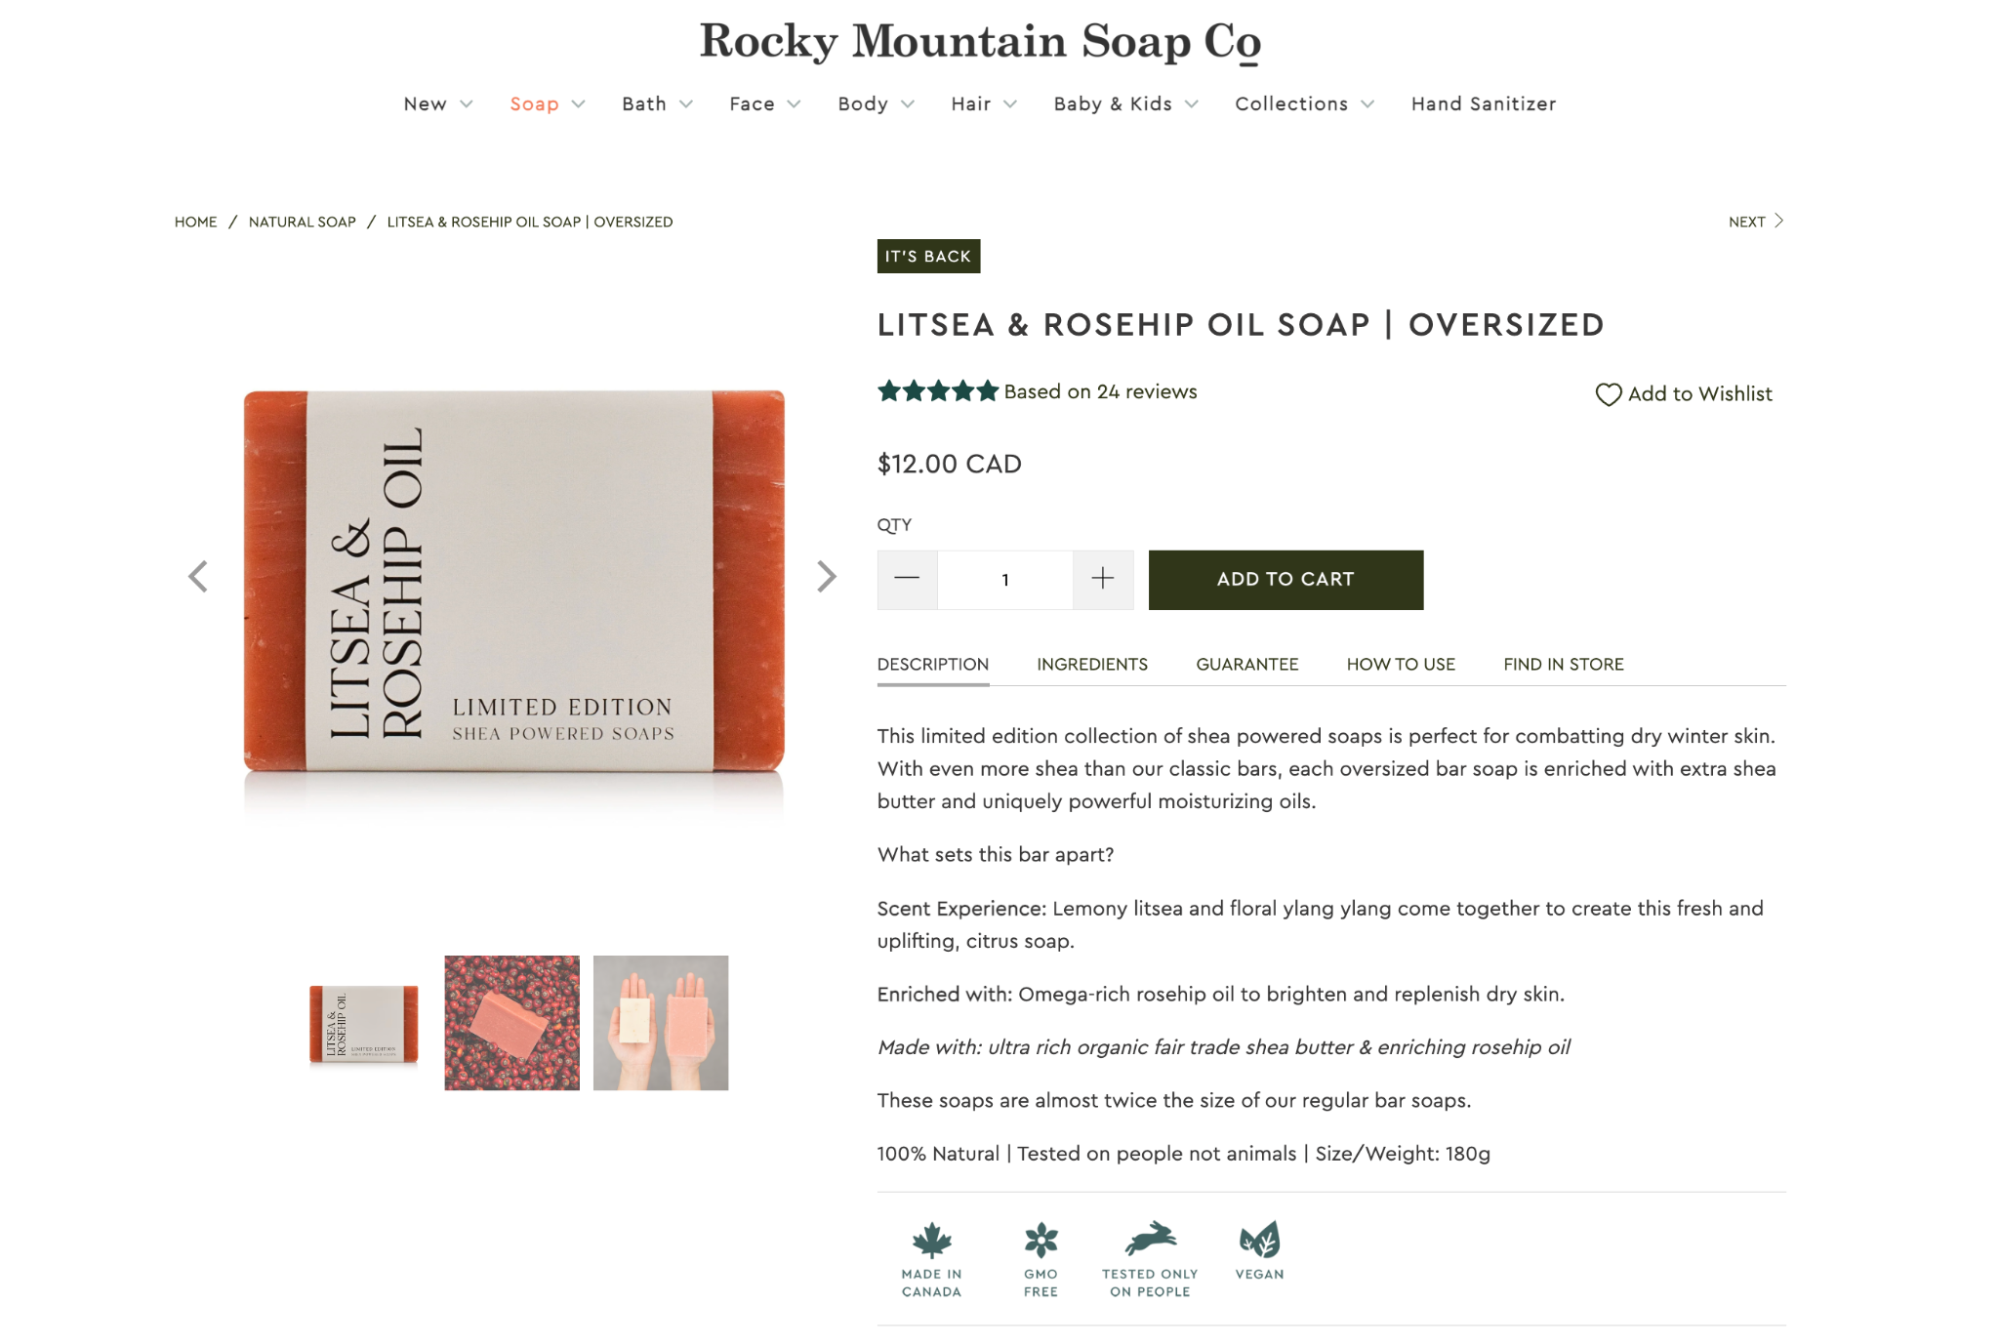 Rocky Mountain Soap’s product page highlights features buyers are interested in, such as the ingredients being 100% natural.